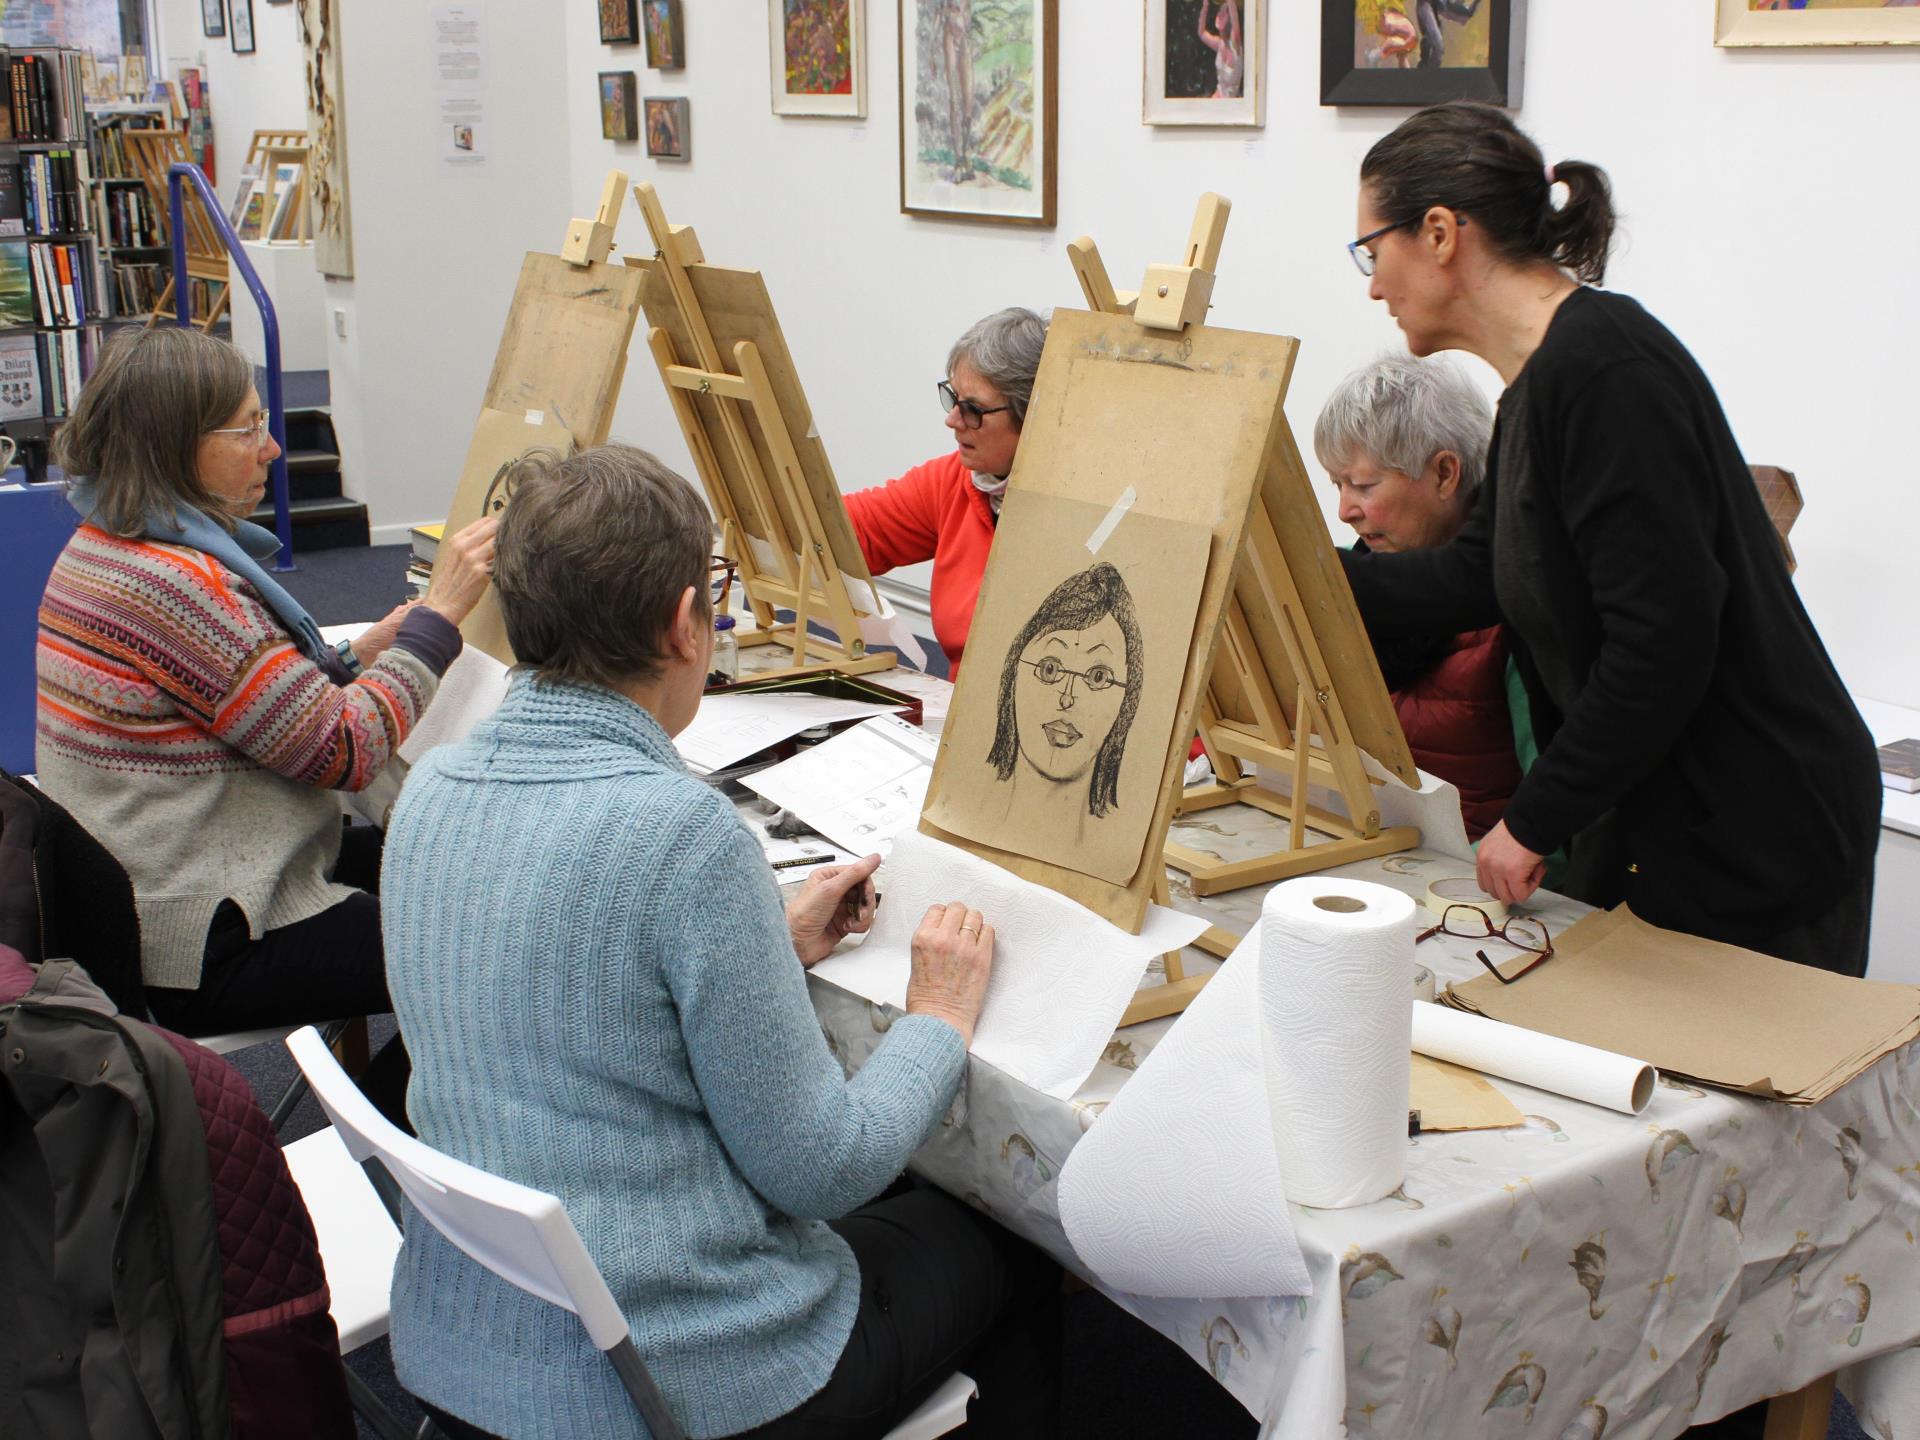 Drawing Workshop in the Gallery